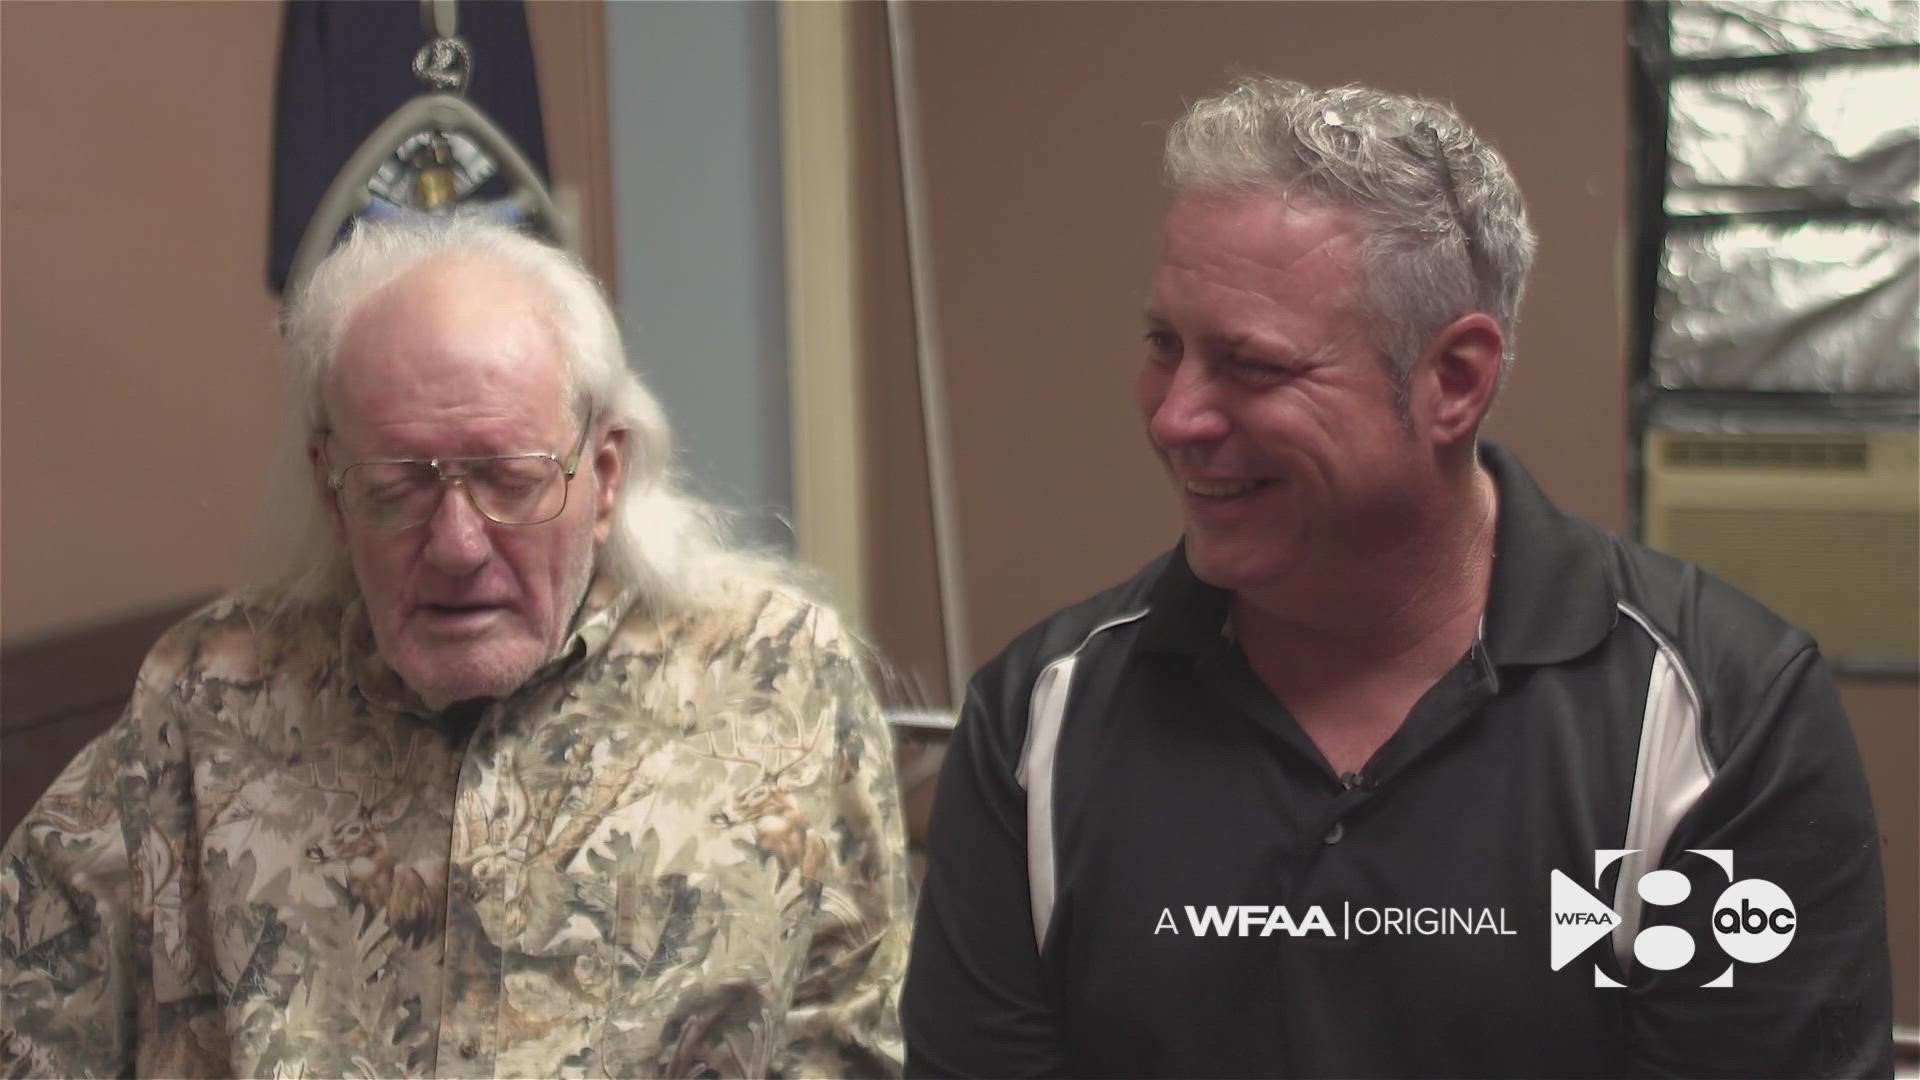 A Korean War veteran living alone in a shack now has a family and a new life thanks to a DNA test connecting him to his long-lost son.